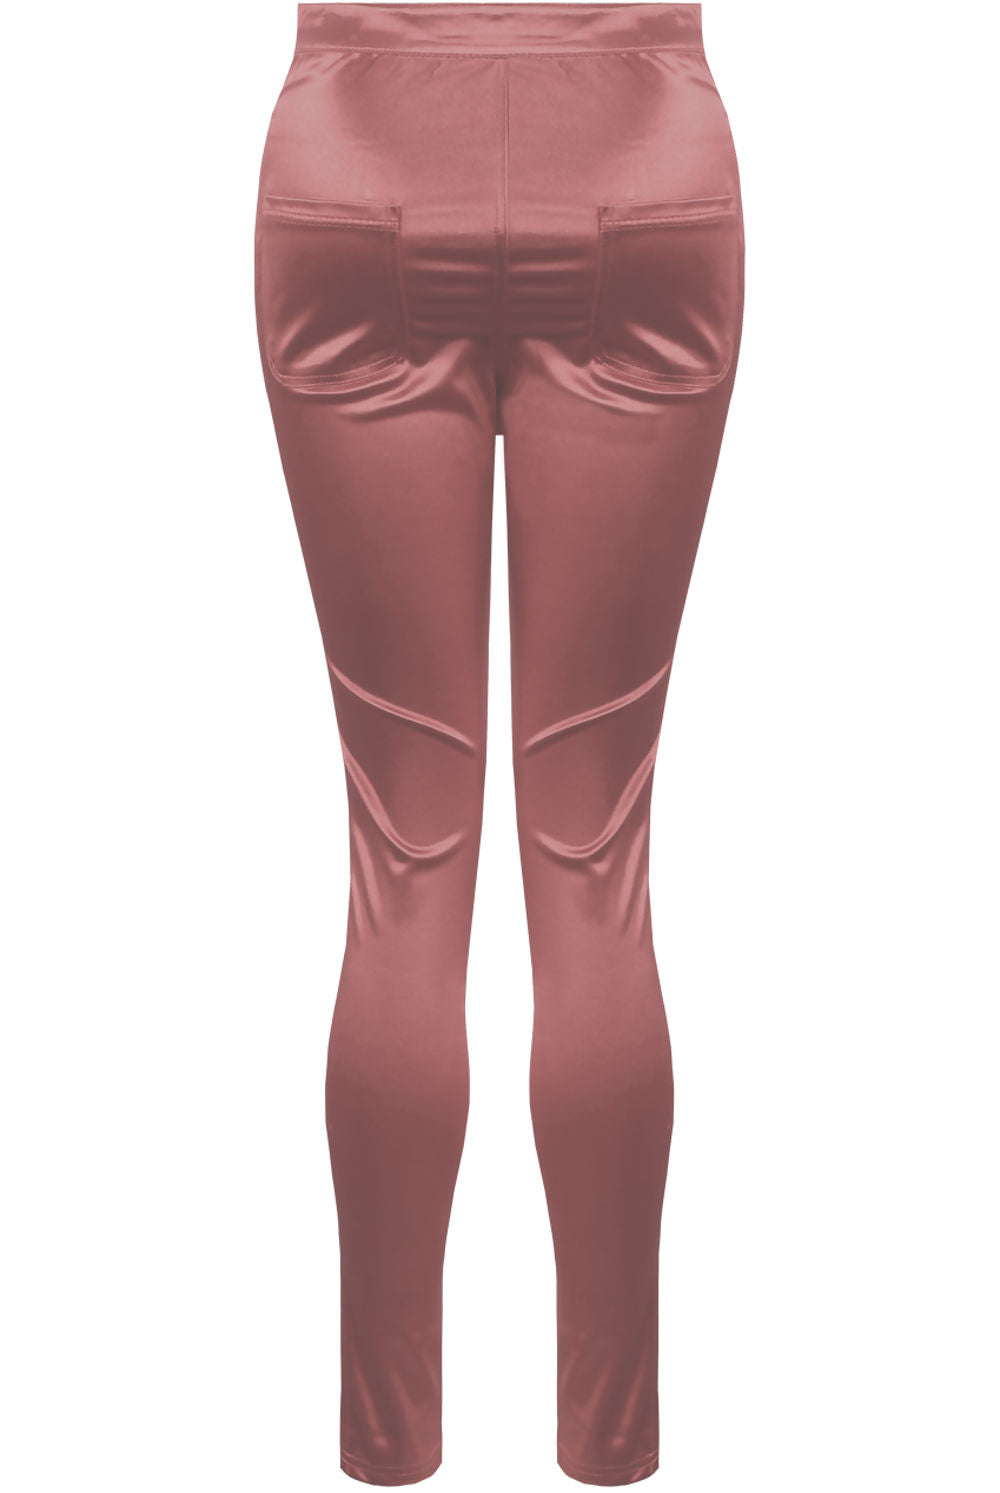  Ghost manequin wears a pink satin skinny fit trousers with front button closure. The Ghost manequin stands so that the back of the trousers and the back pockets is visible. 